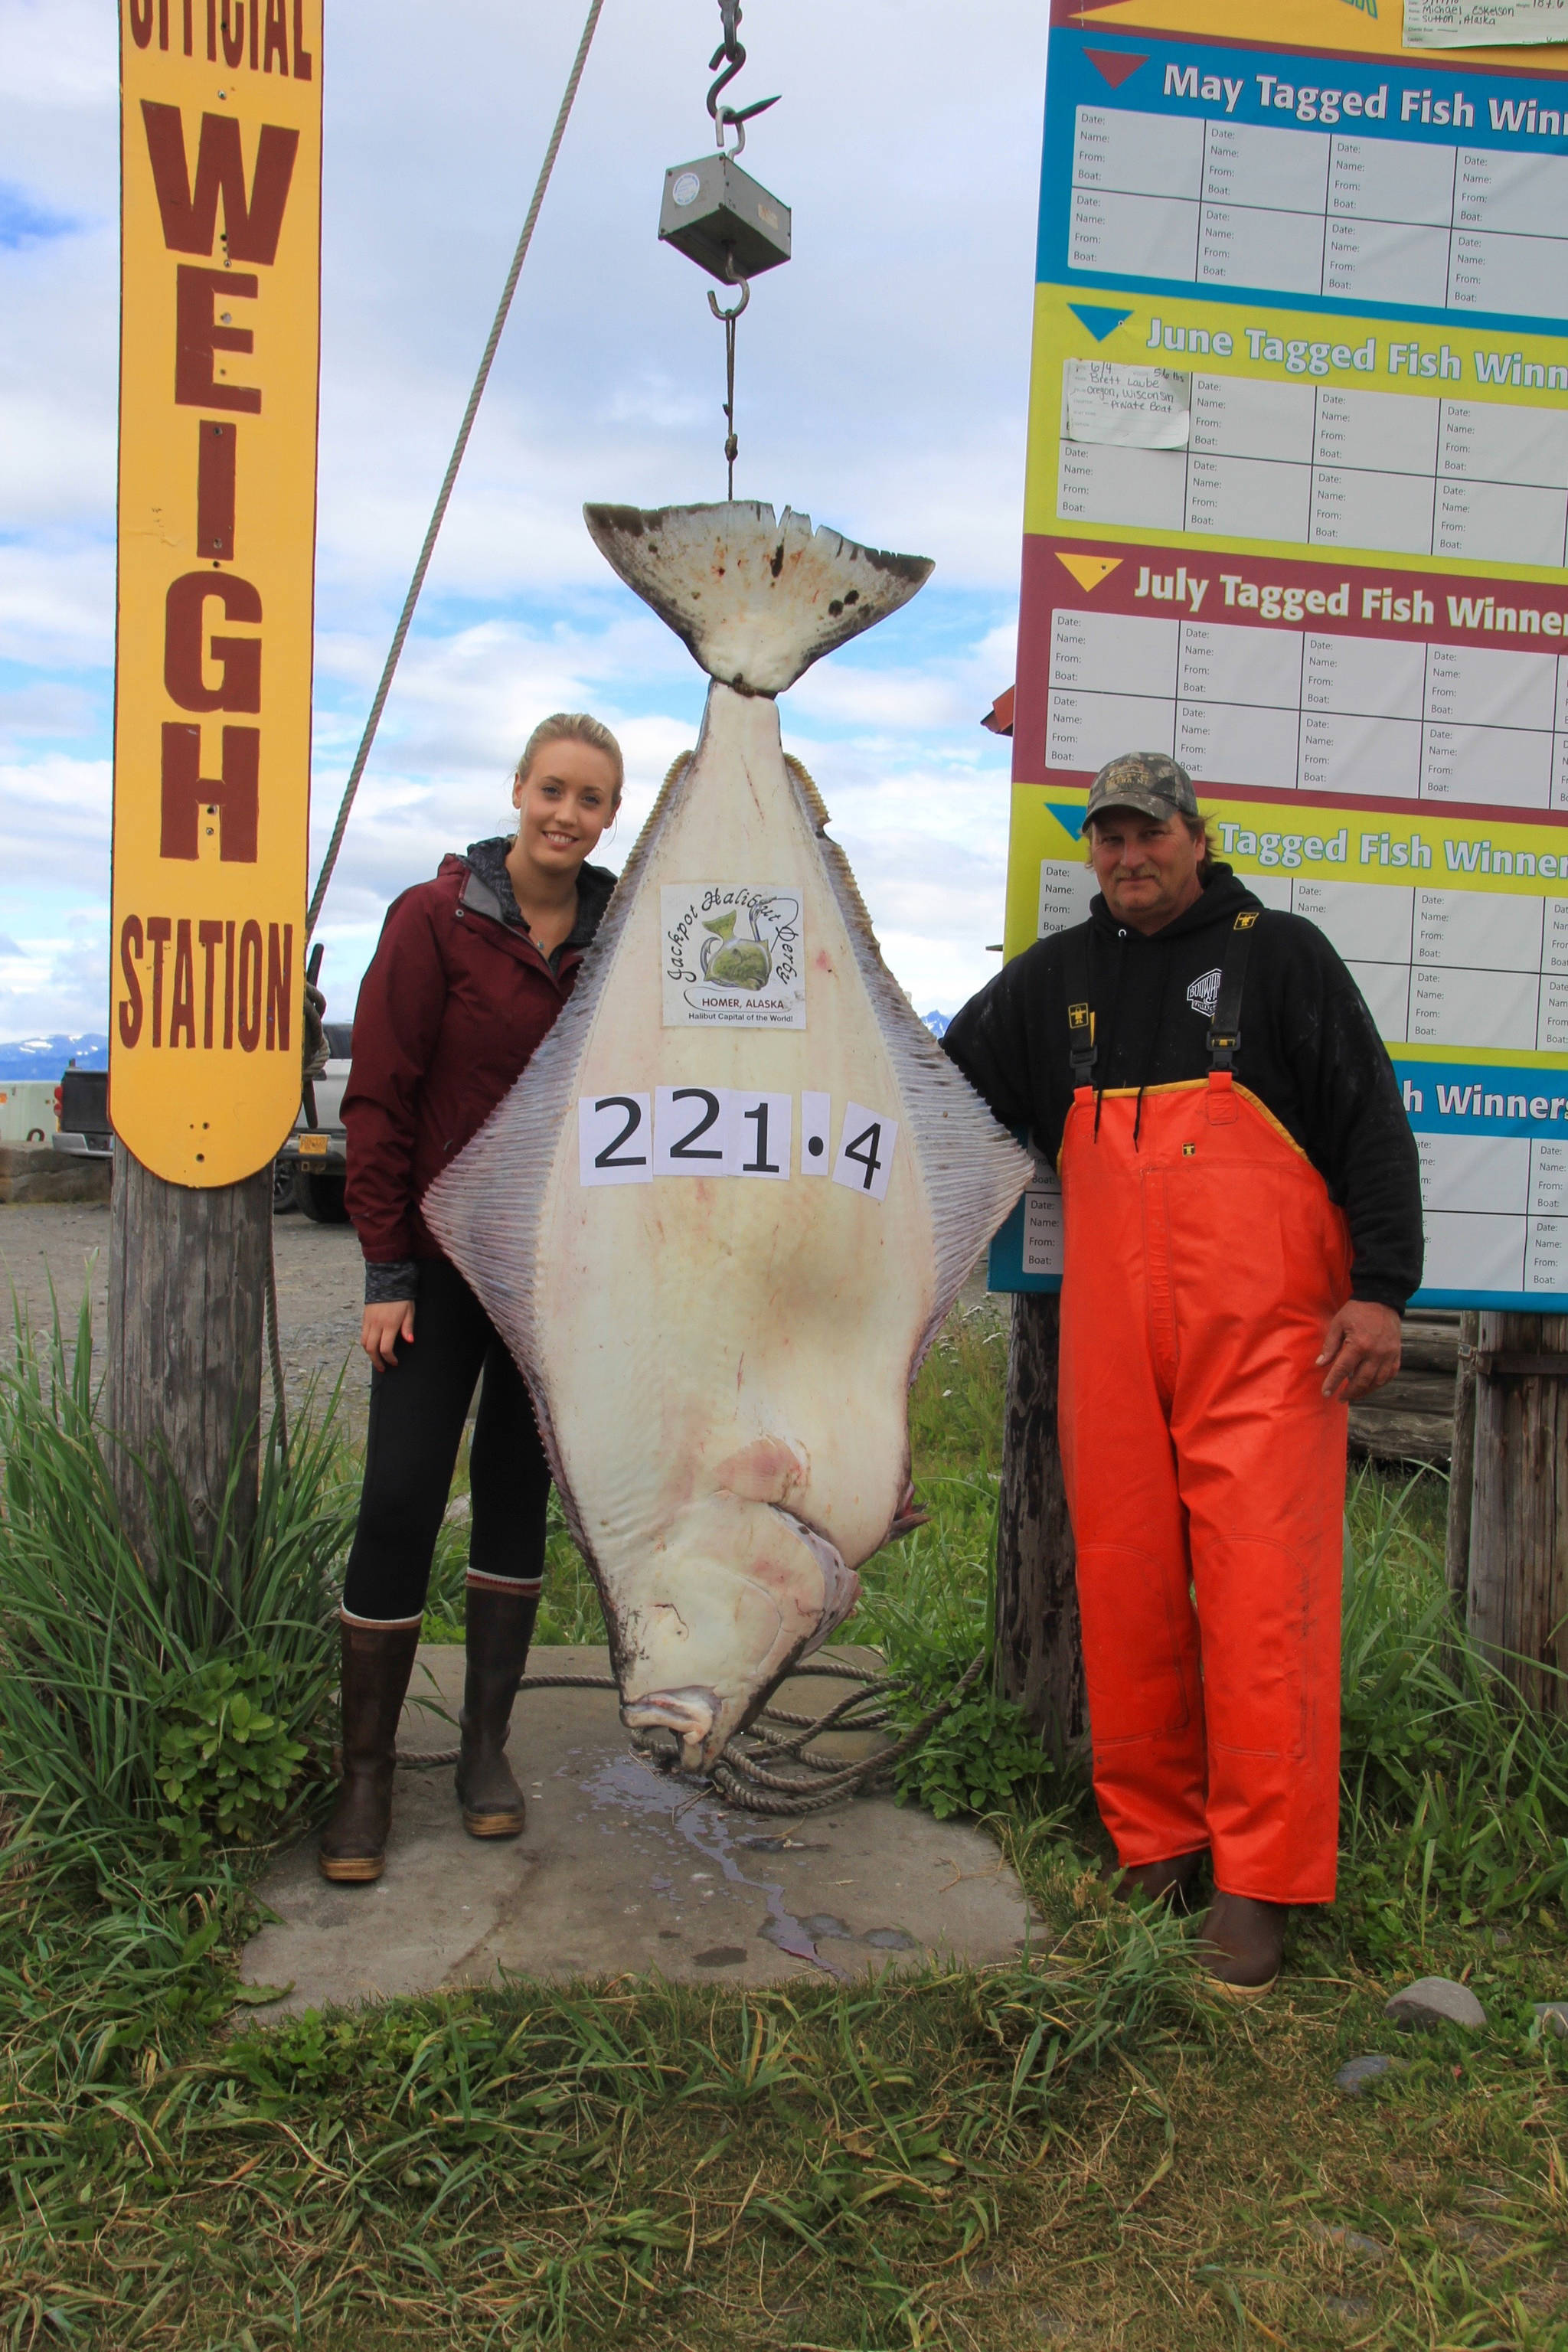 Ashley Camp, left, of Vancouver, British Columbia, Canada, poses with her 221.4-pound halibut caught on July 28, 2018 near Homer, Alaska. (Homer News file photo)